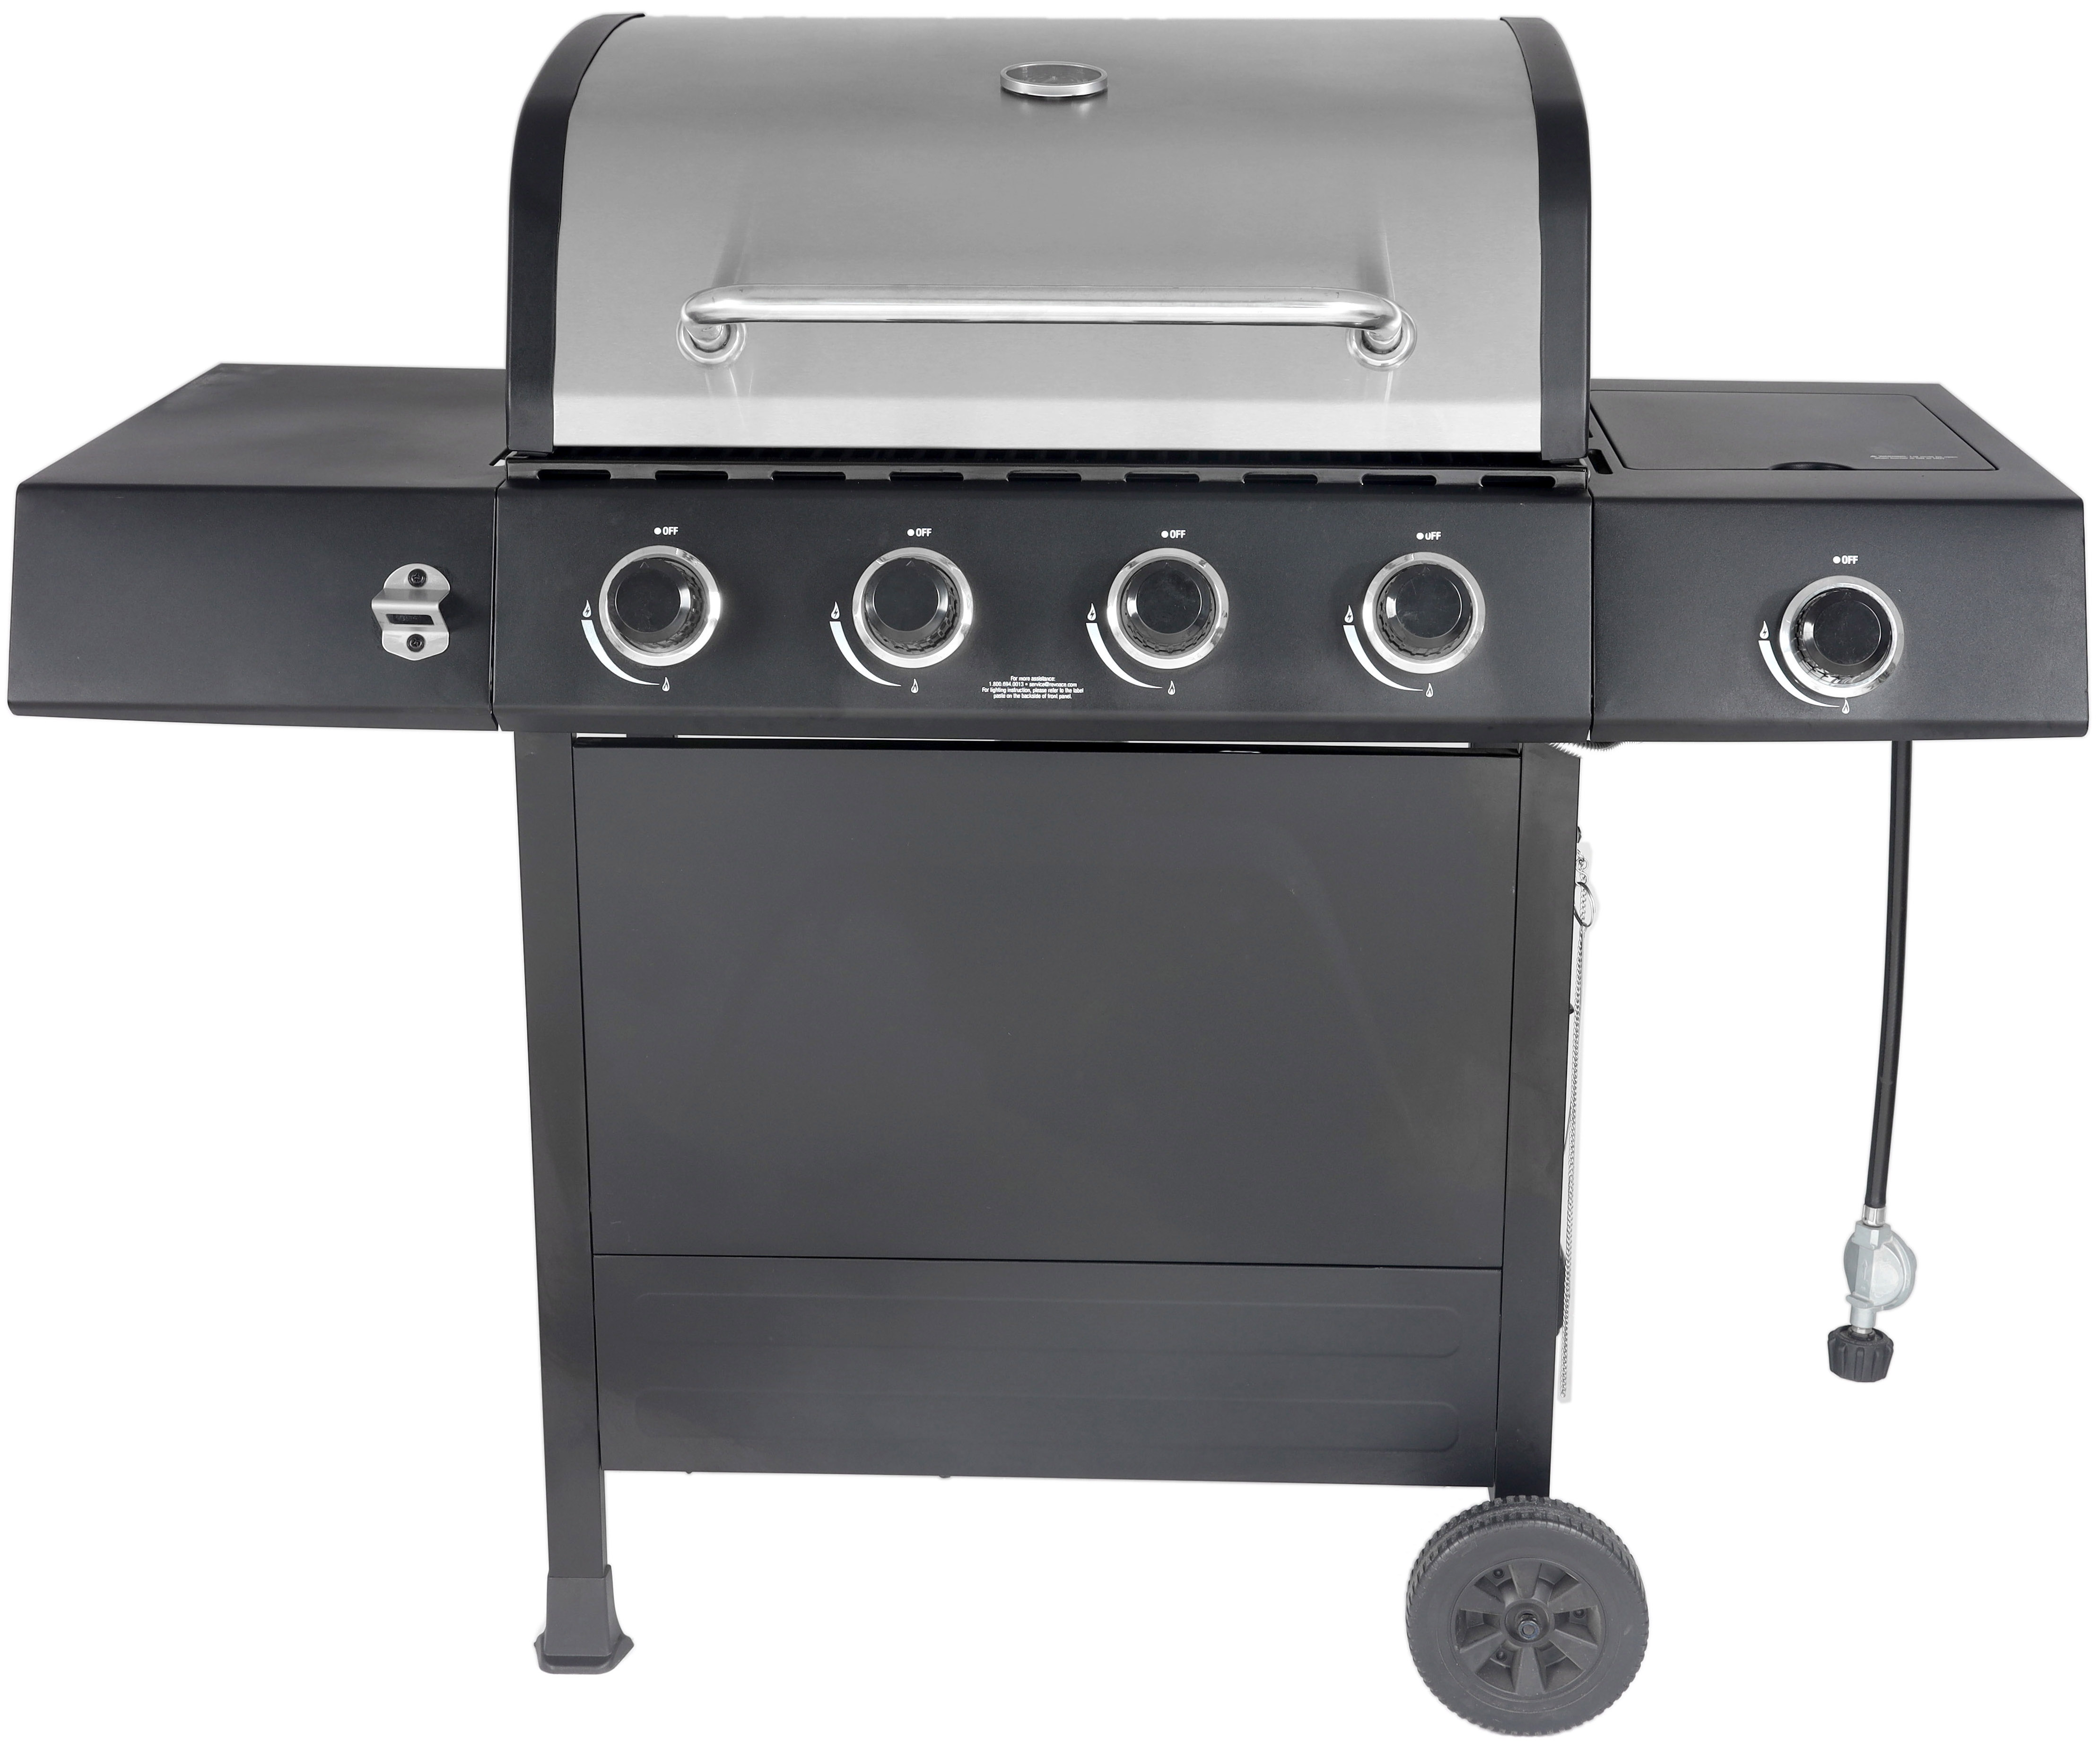 RevoAce 4-Burner Propane Gas Grill with Side Burner, Stainless Steel & Black - image 1 of 19